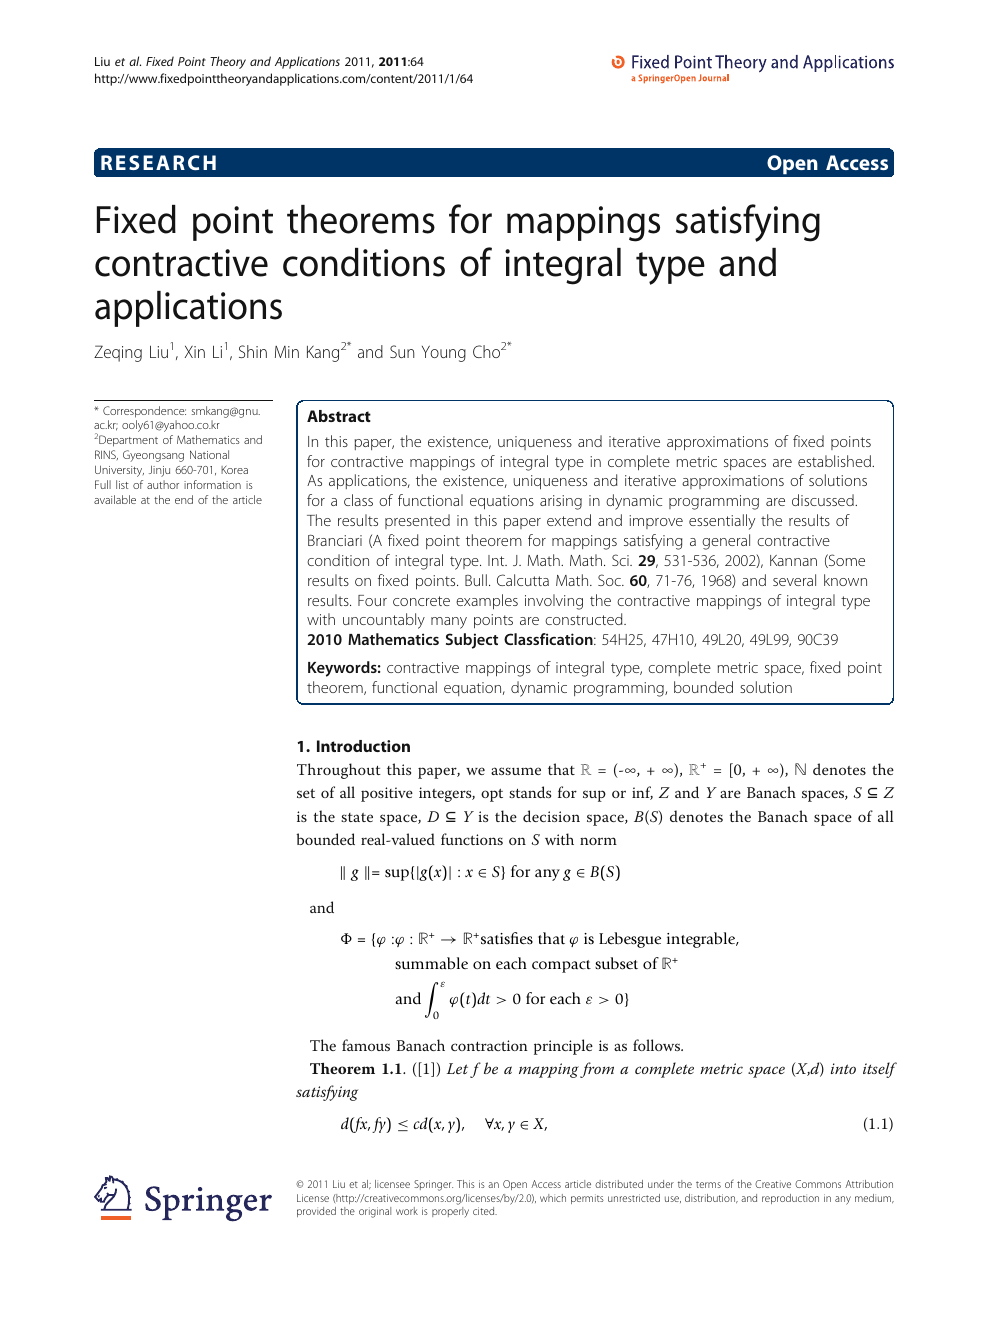 Fixed Point Theorems For Mappings Satisfying Contractive Conditions Of Integral Type And Applications Topic Of Research Paper In Mathematics Download Scholarly Article Pdf And Read For Free On Cyberleninka Open Science